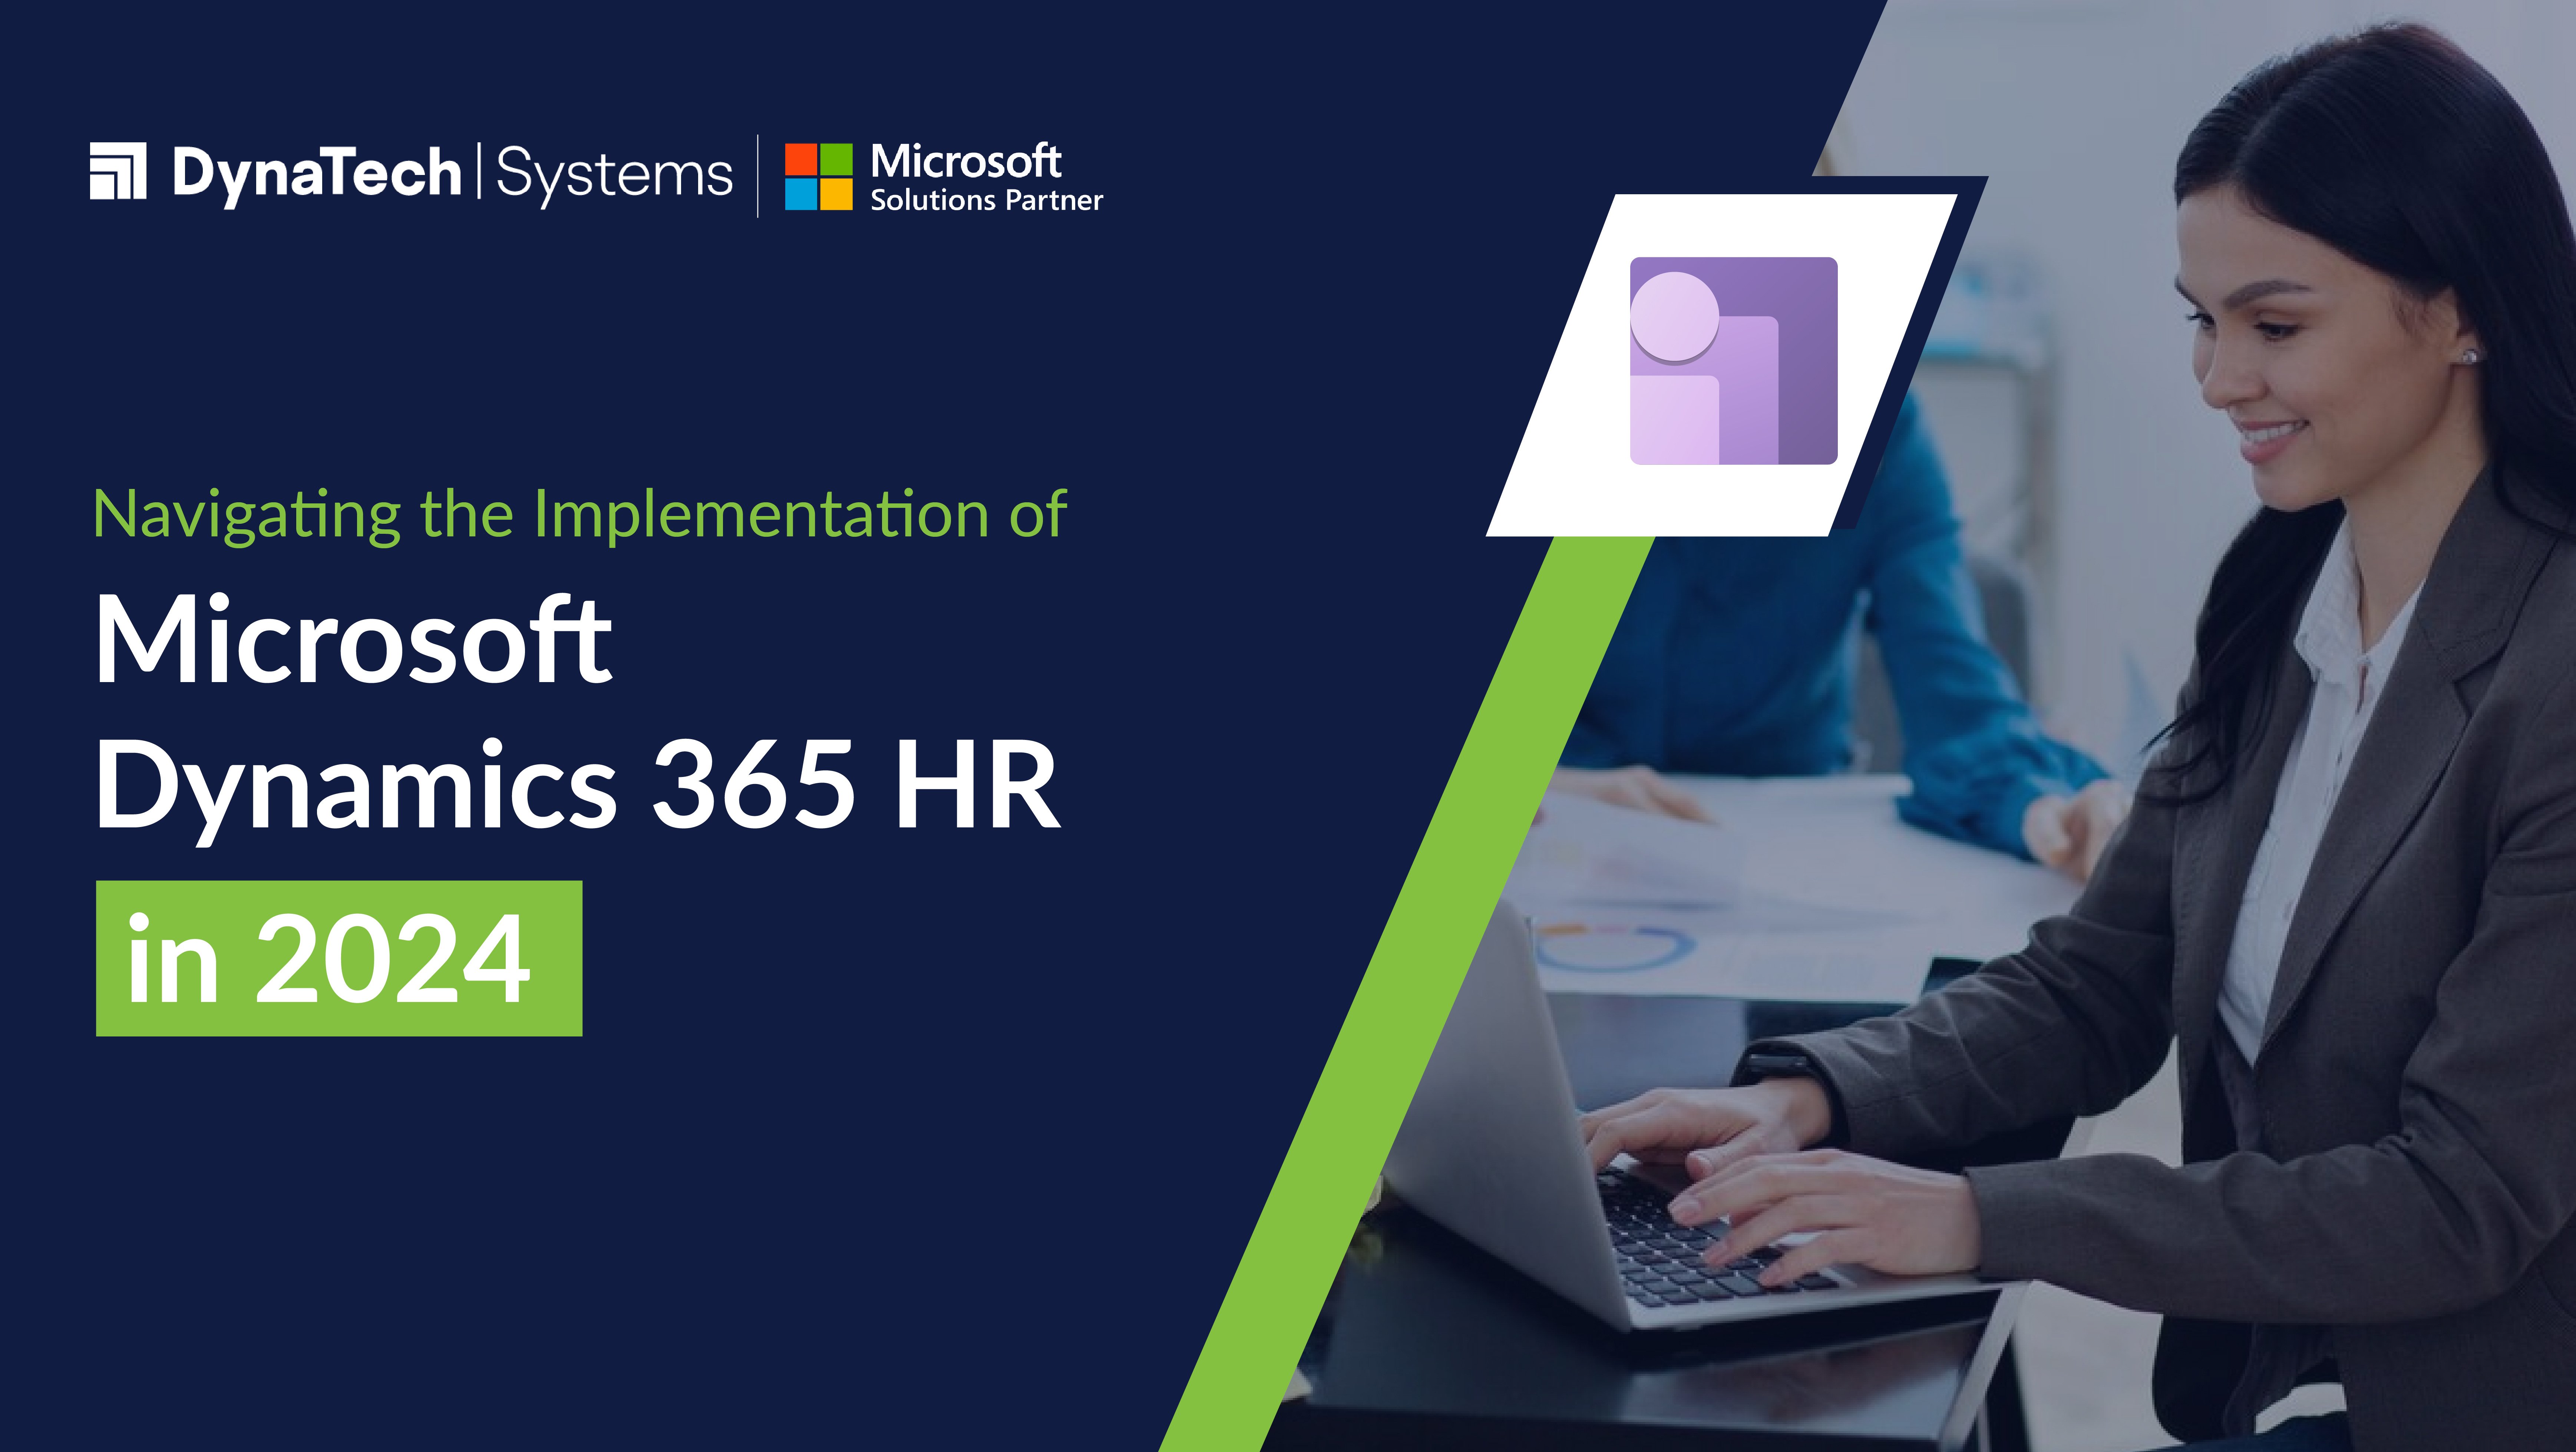 Navigating the Implementation of Microsoft Dynamics 365 HR in 2024